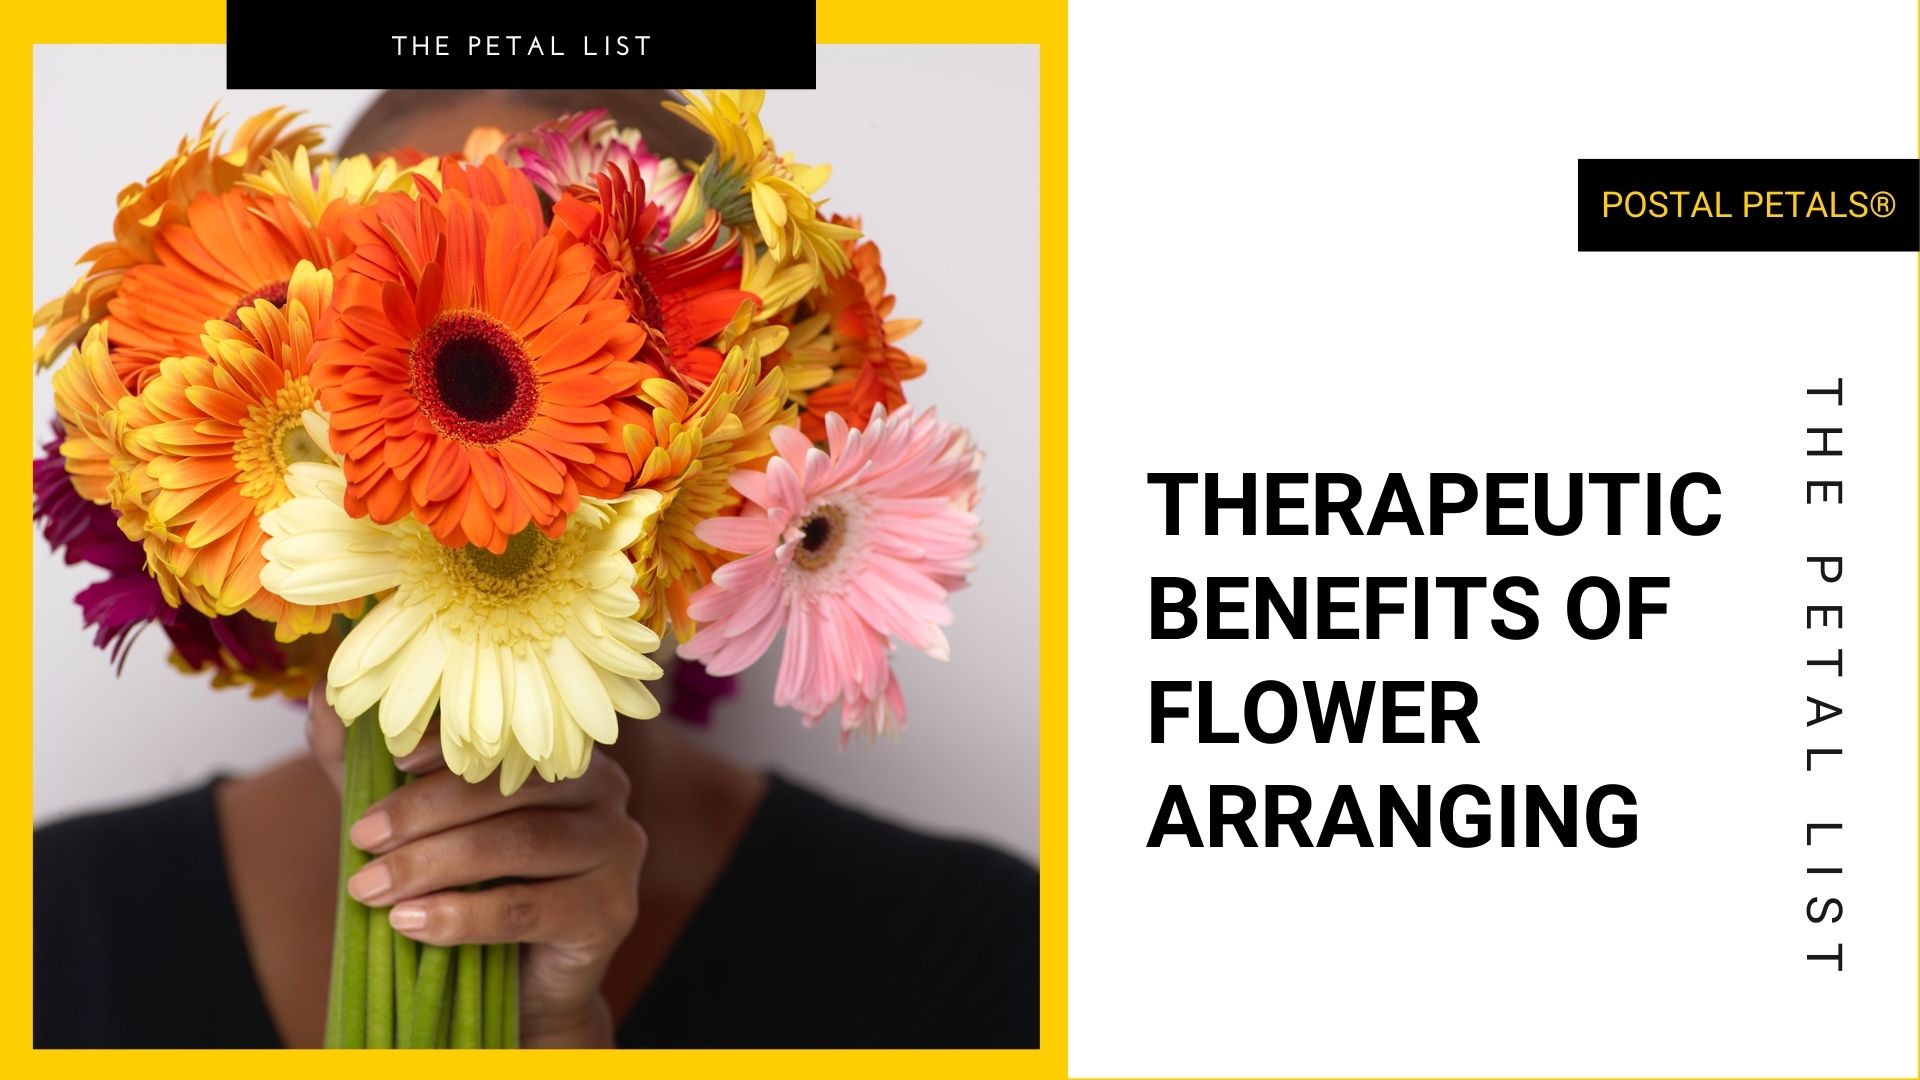 The Therapeutic Benefits of Flower Arranging